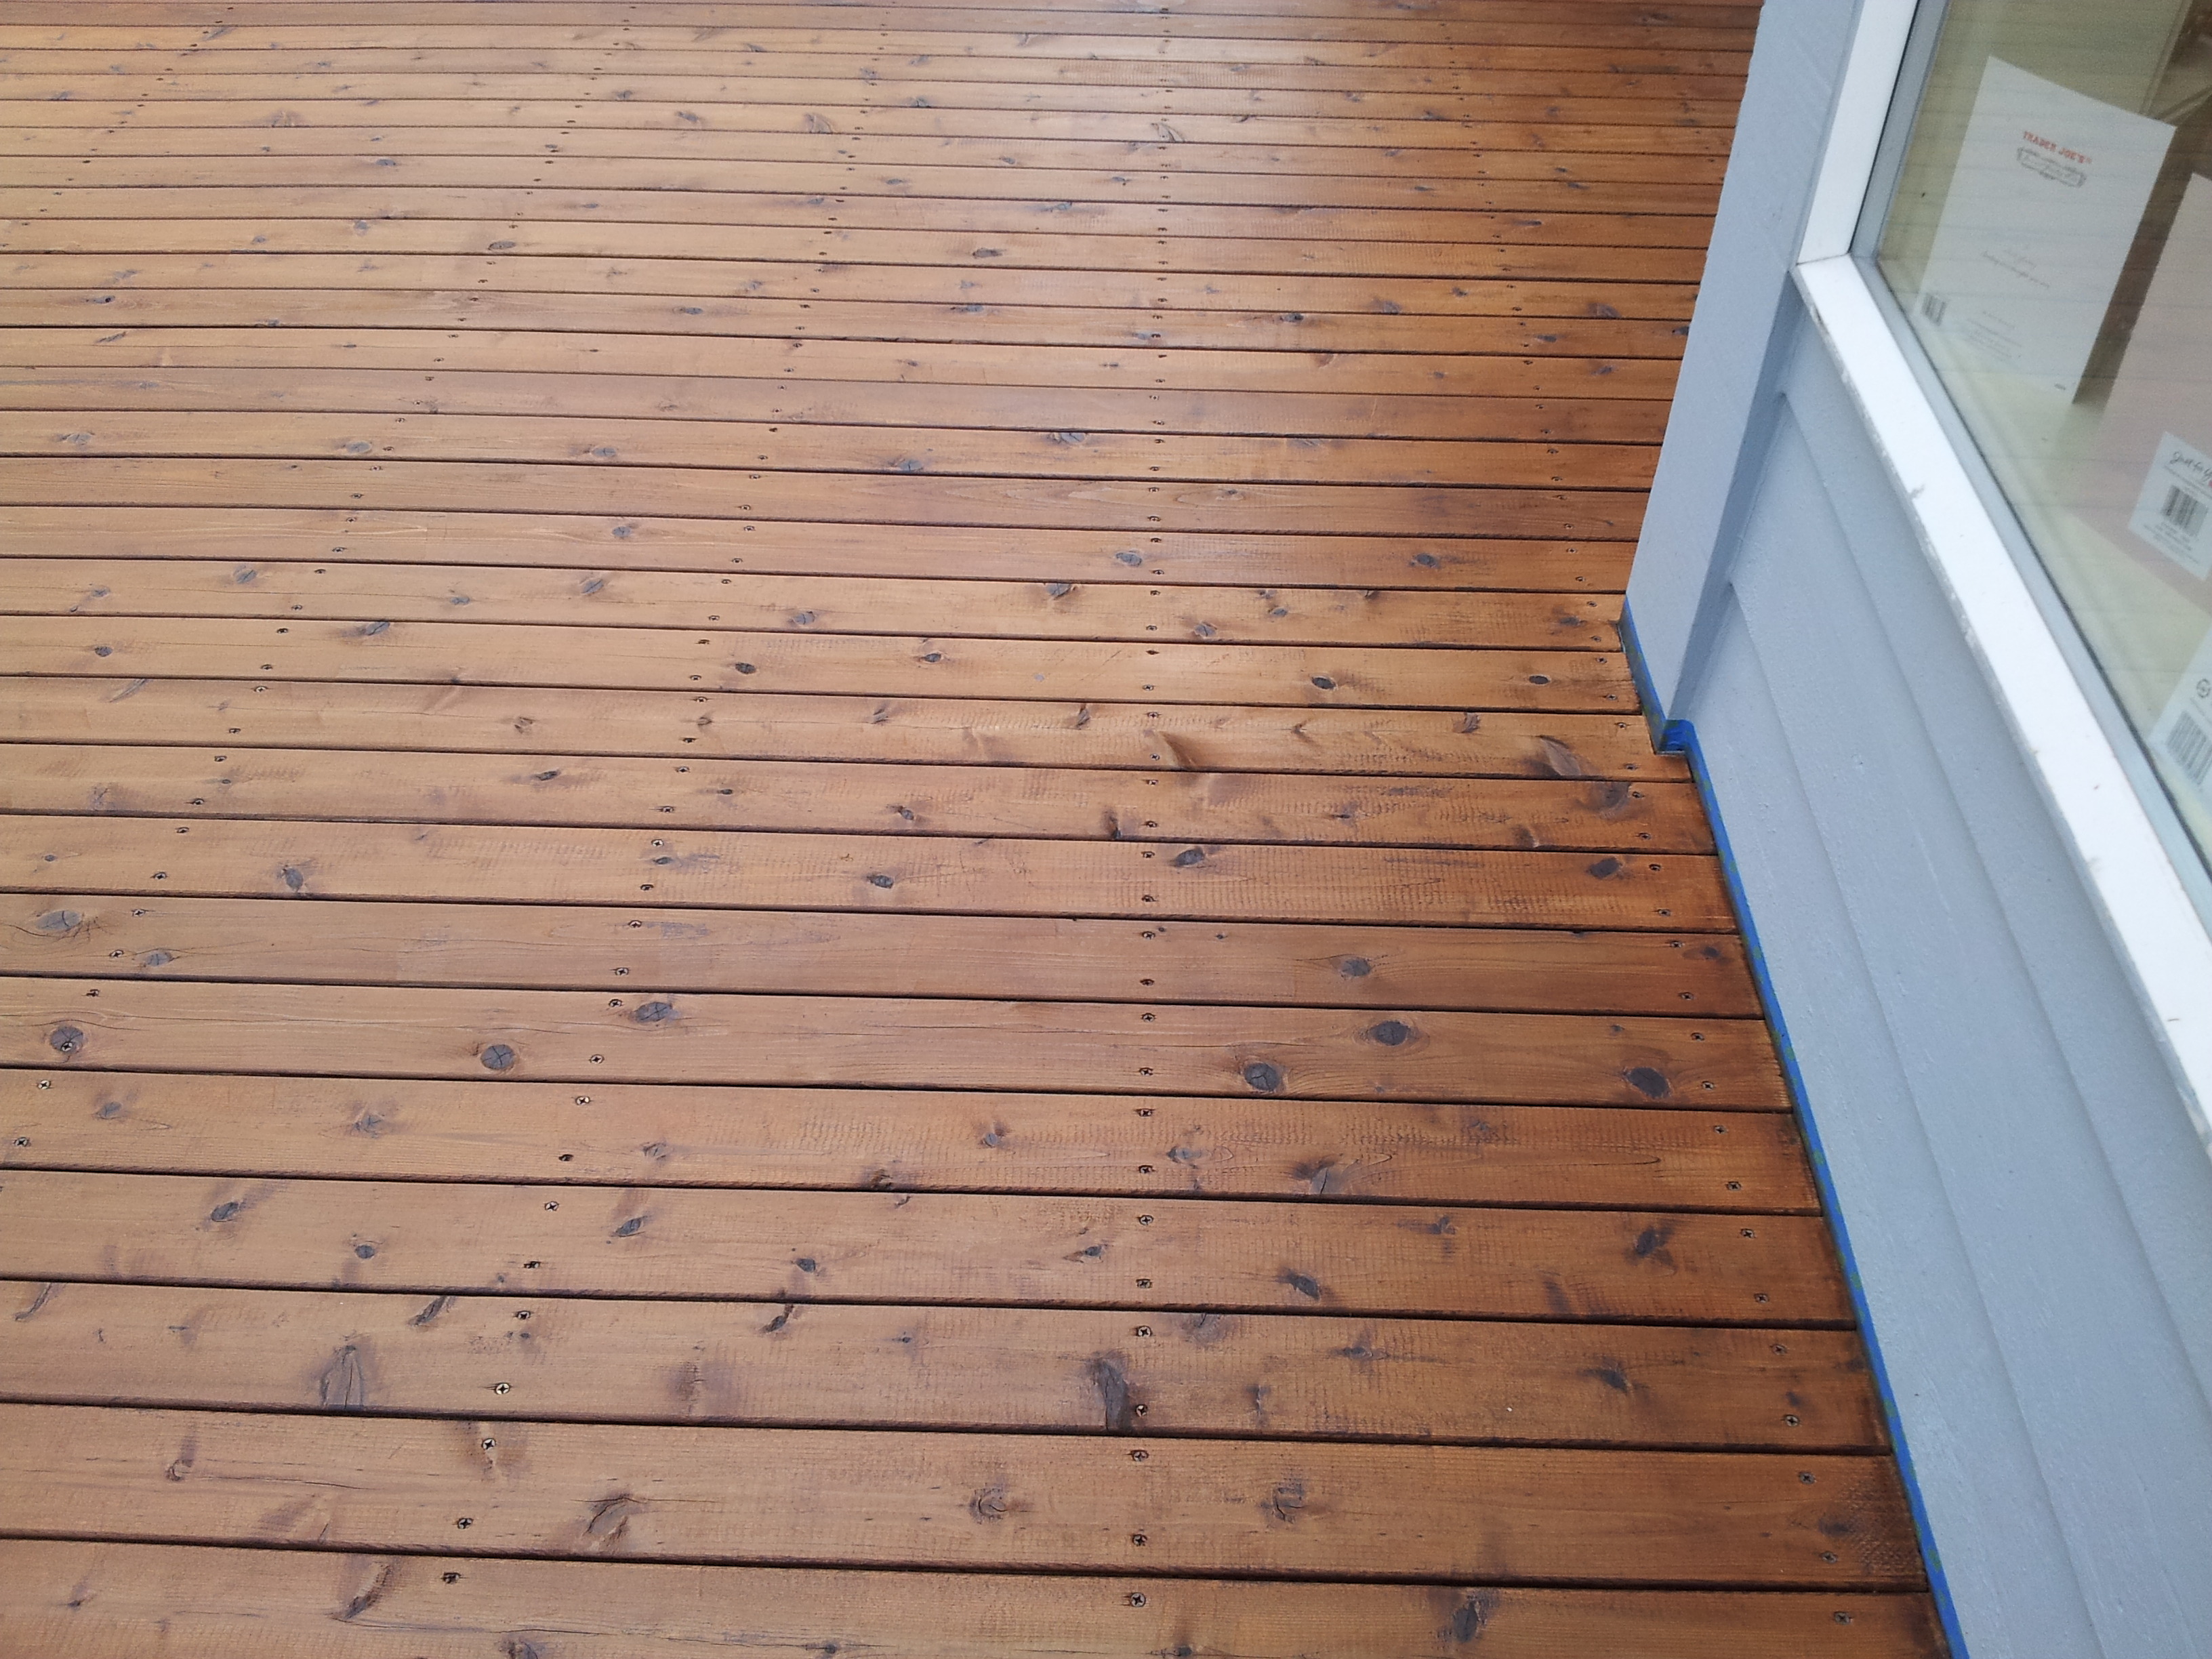 Oil Based Deck Stains 2019 Best Deck Stain Reviews Ratings intended for measurements 3264 X 2448